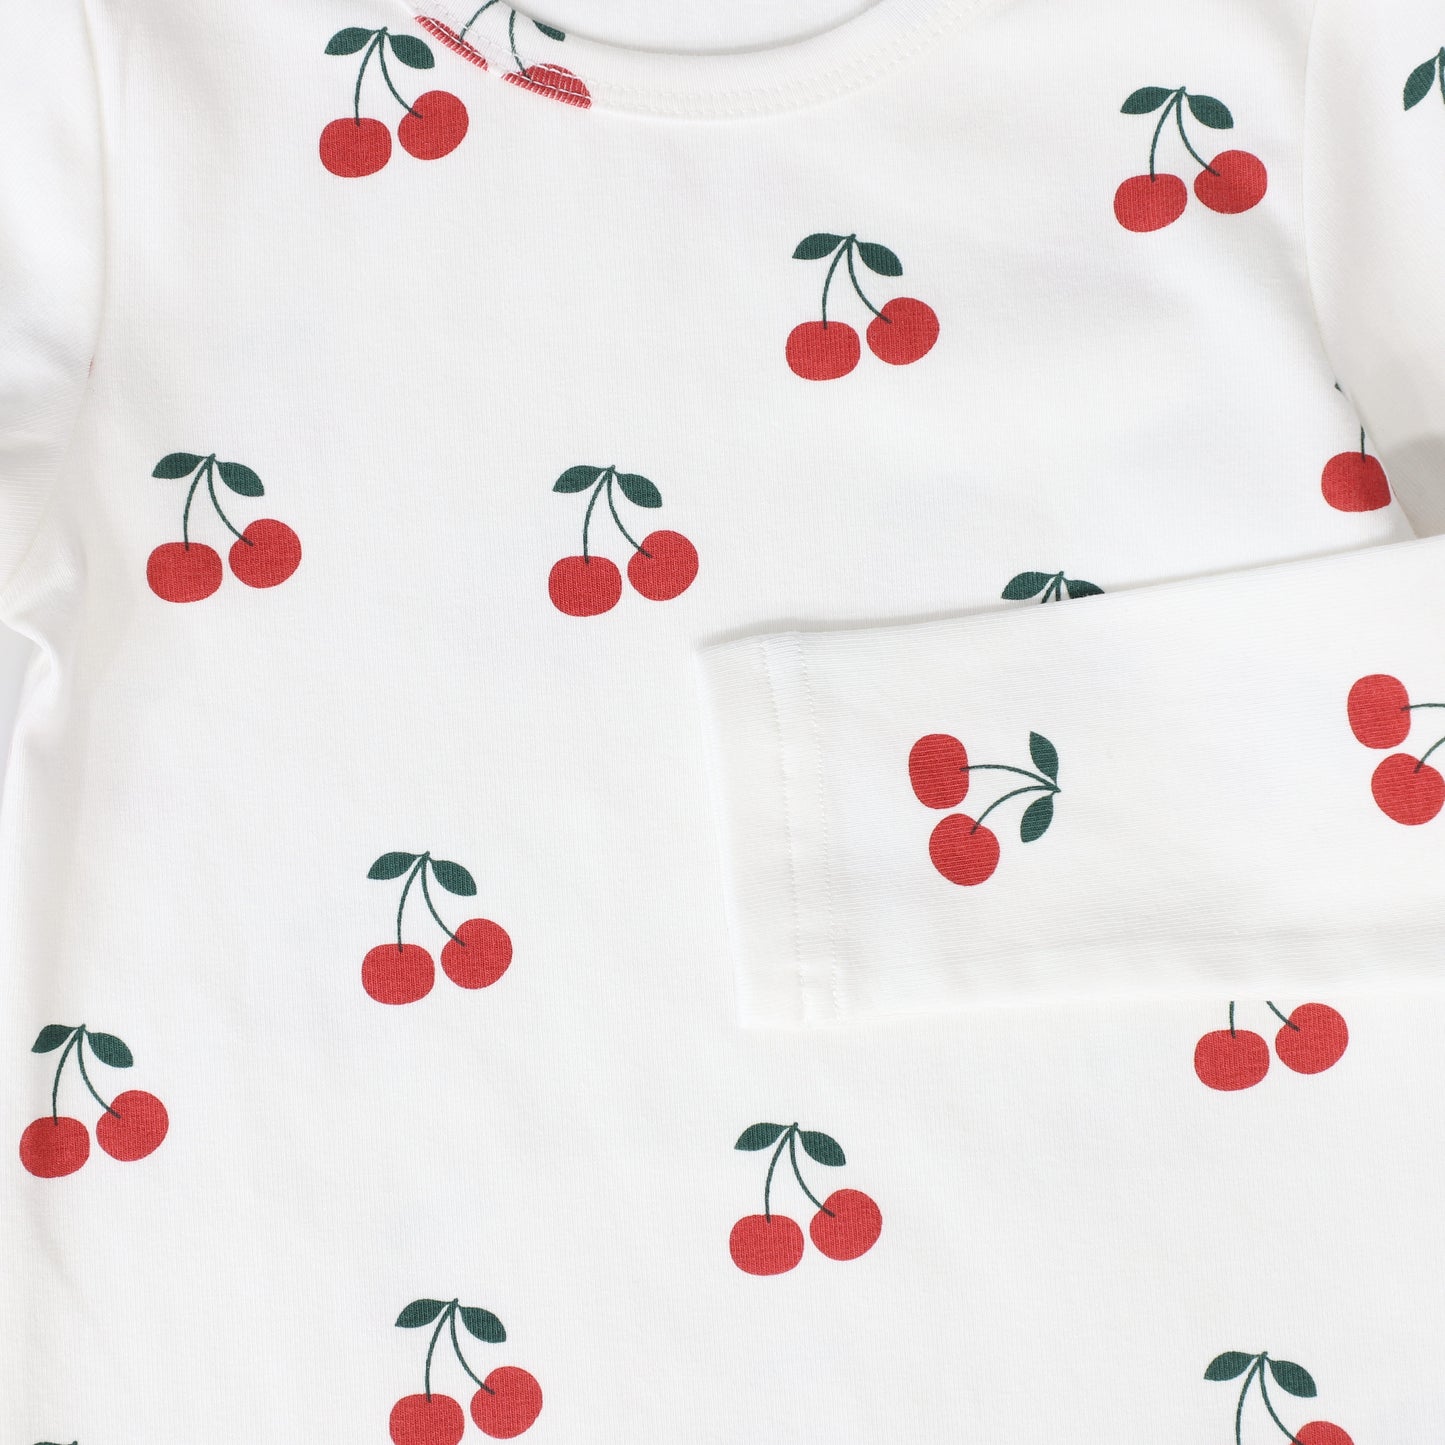 PHIL AND PHOEBE WHITE CHERRY SKETCH TEE